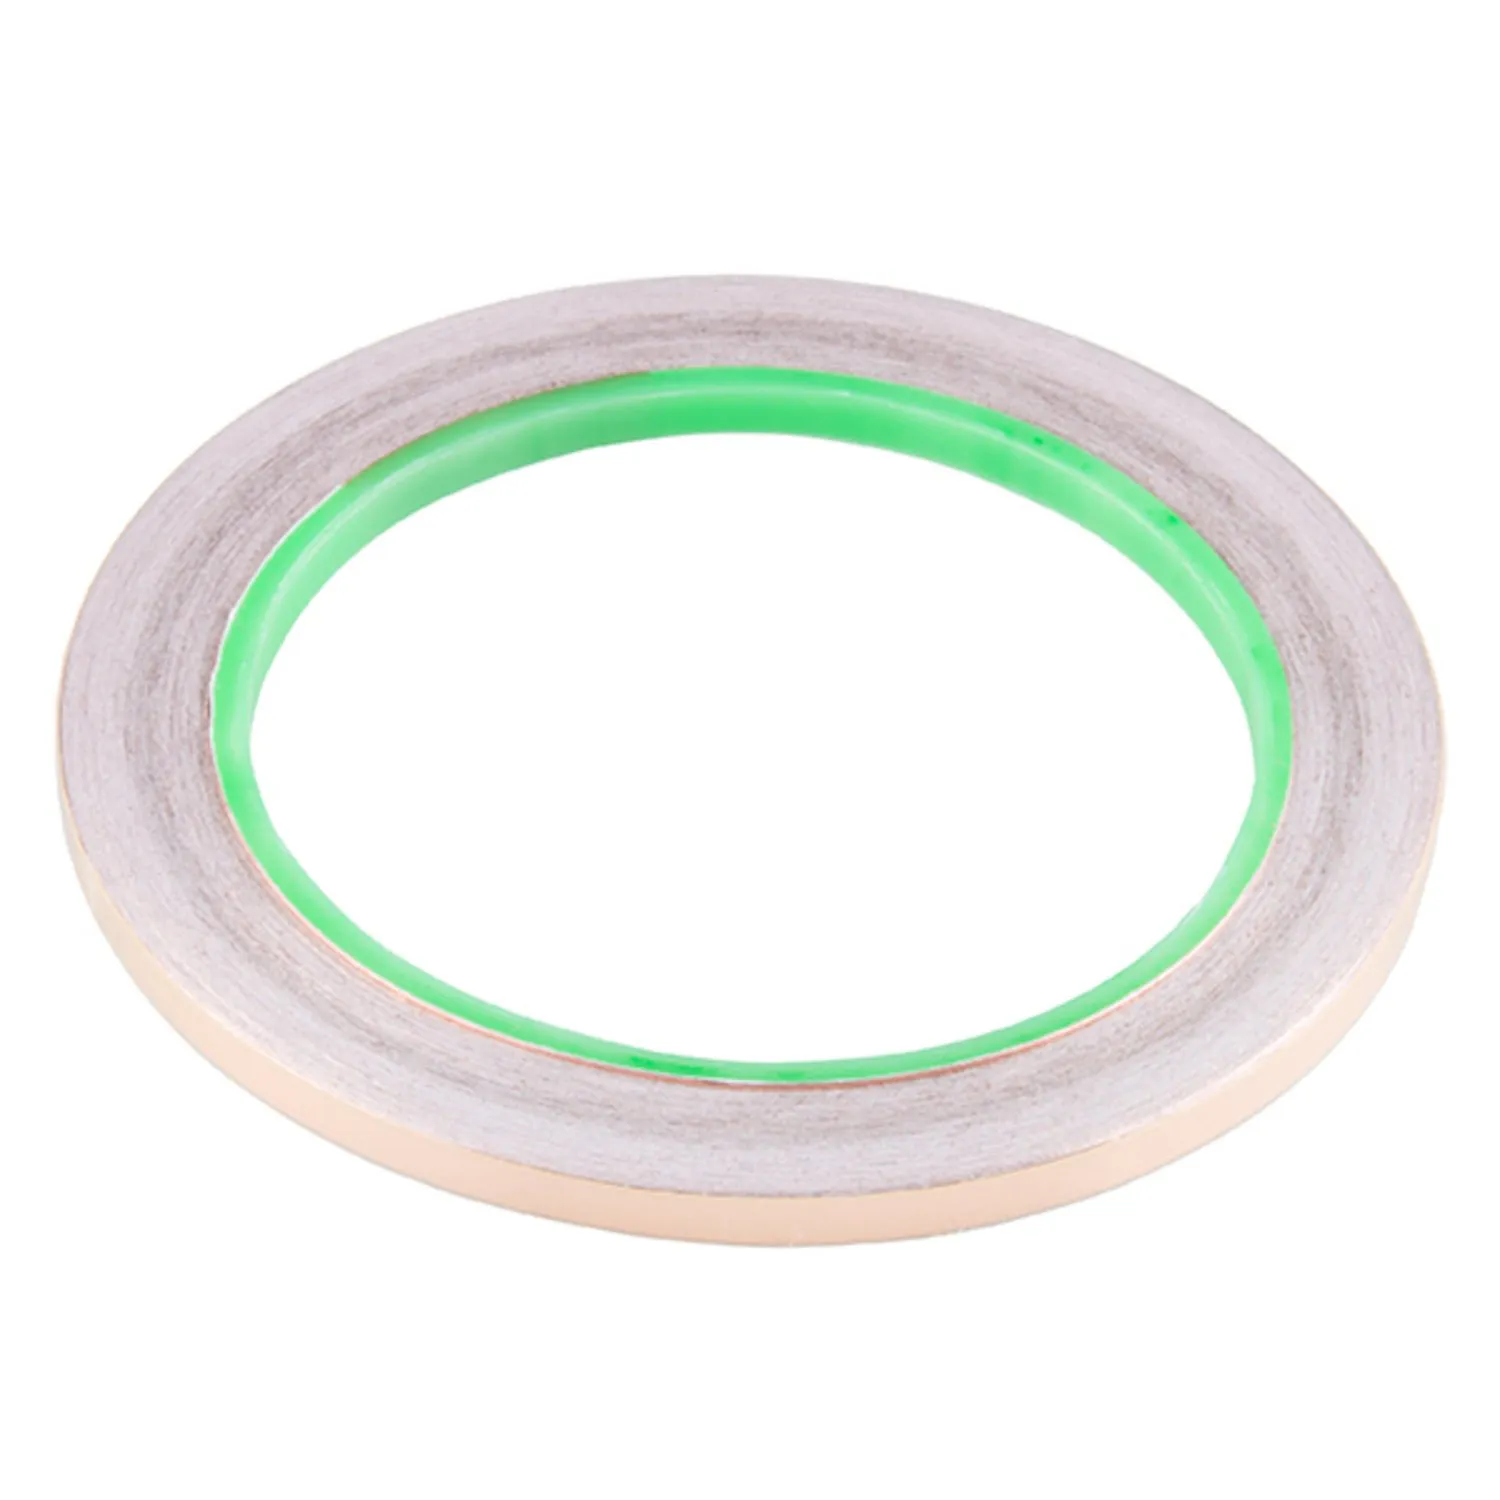 Photo of Copper Tape - Conductive Adhesive, 5mm (50ft)